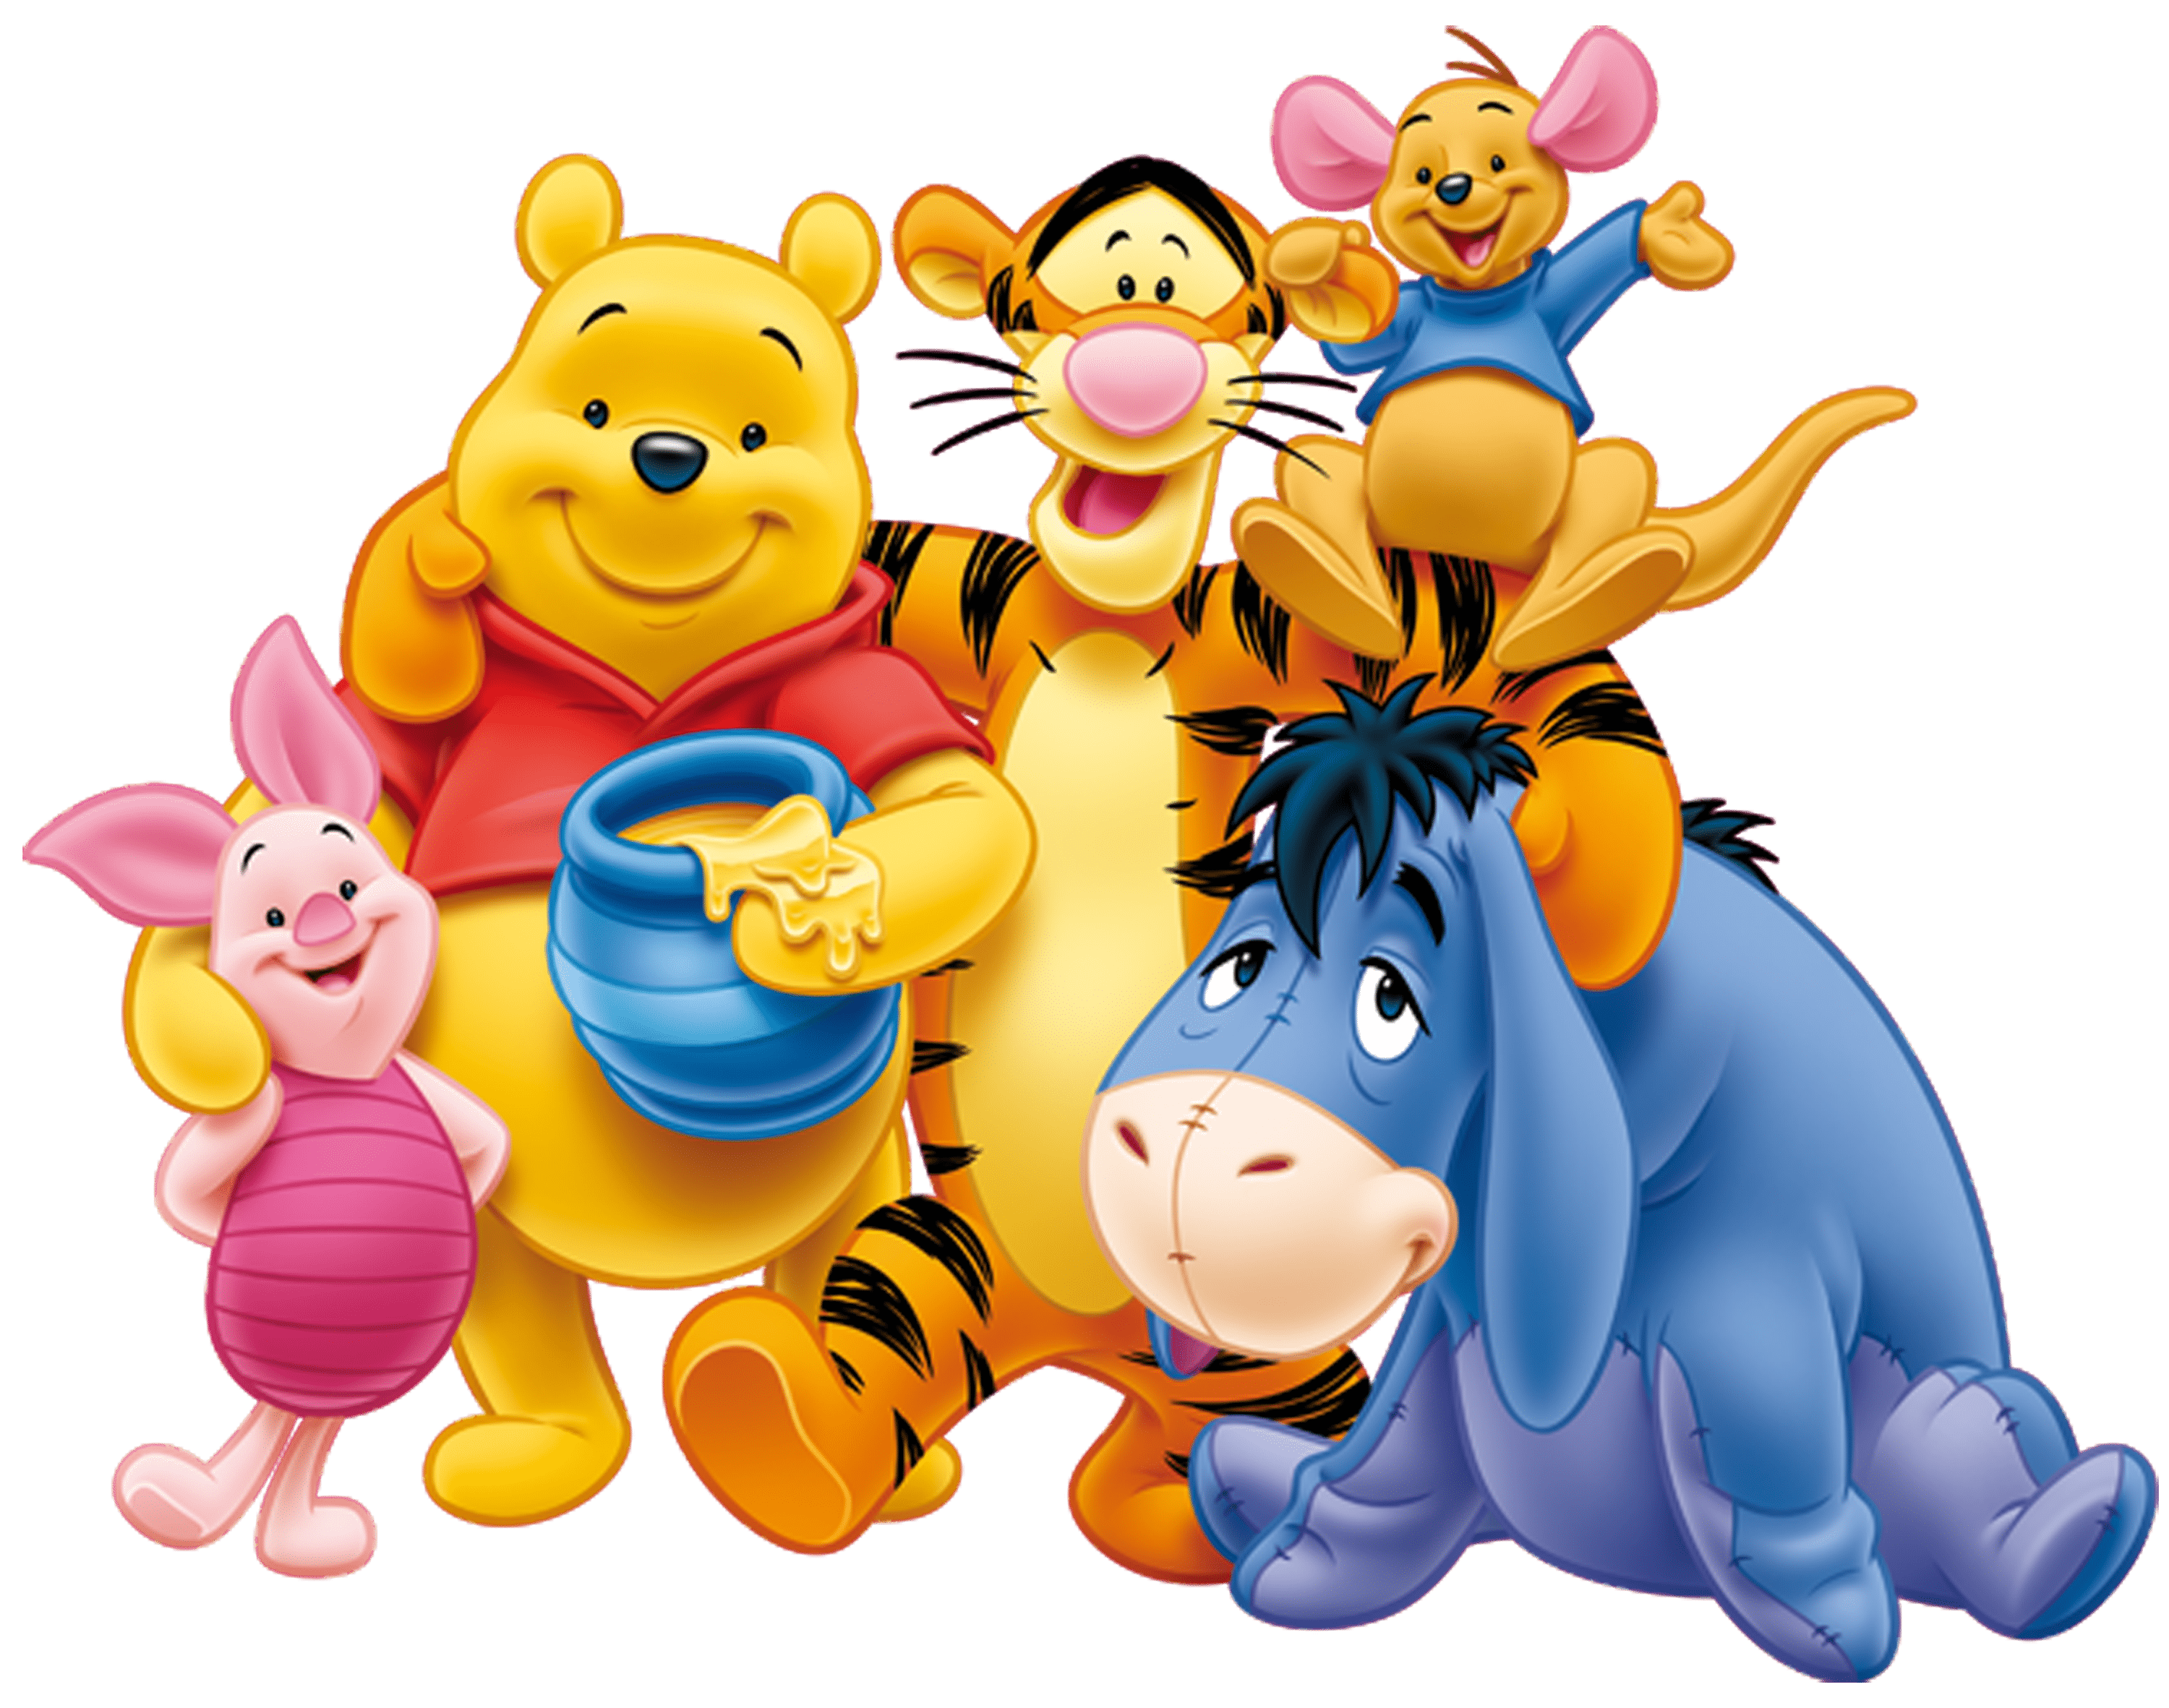 Download Pooh and friends Wallpaper by gemmabiernacki123450  63  Free on  ZEDGE now Browse mil  Winnie the pooh Winnie the pooh pictures Cute  winnie the pooh